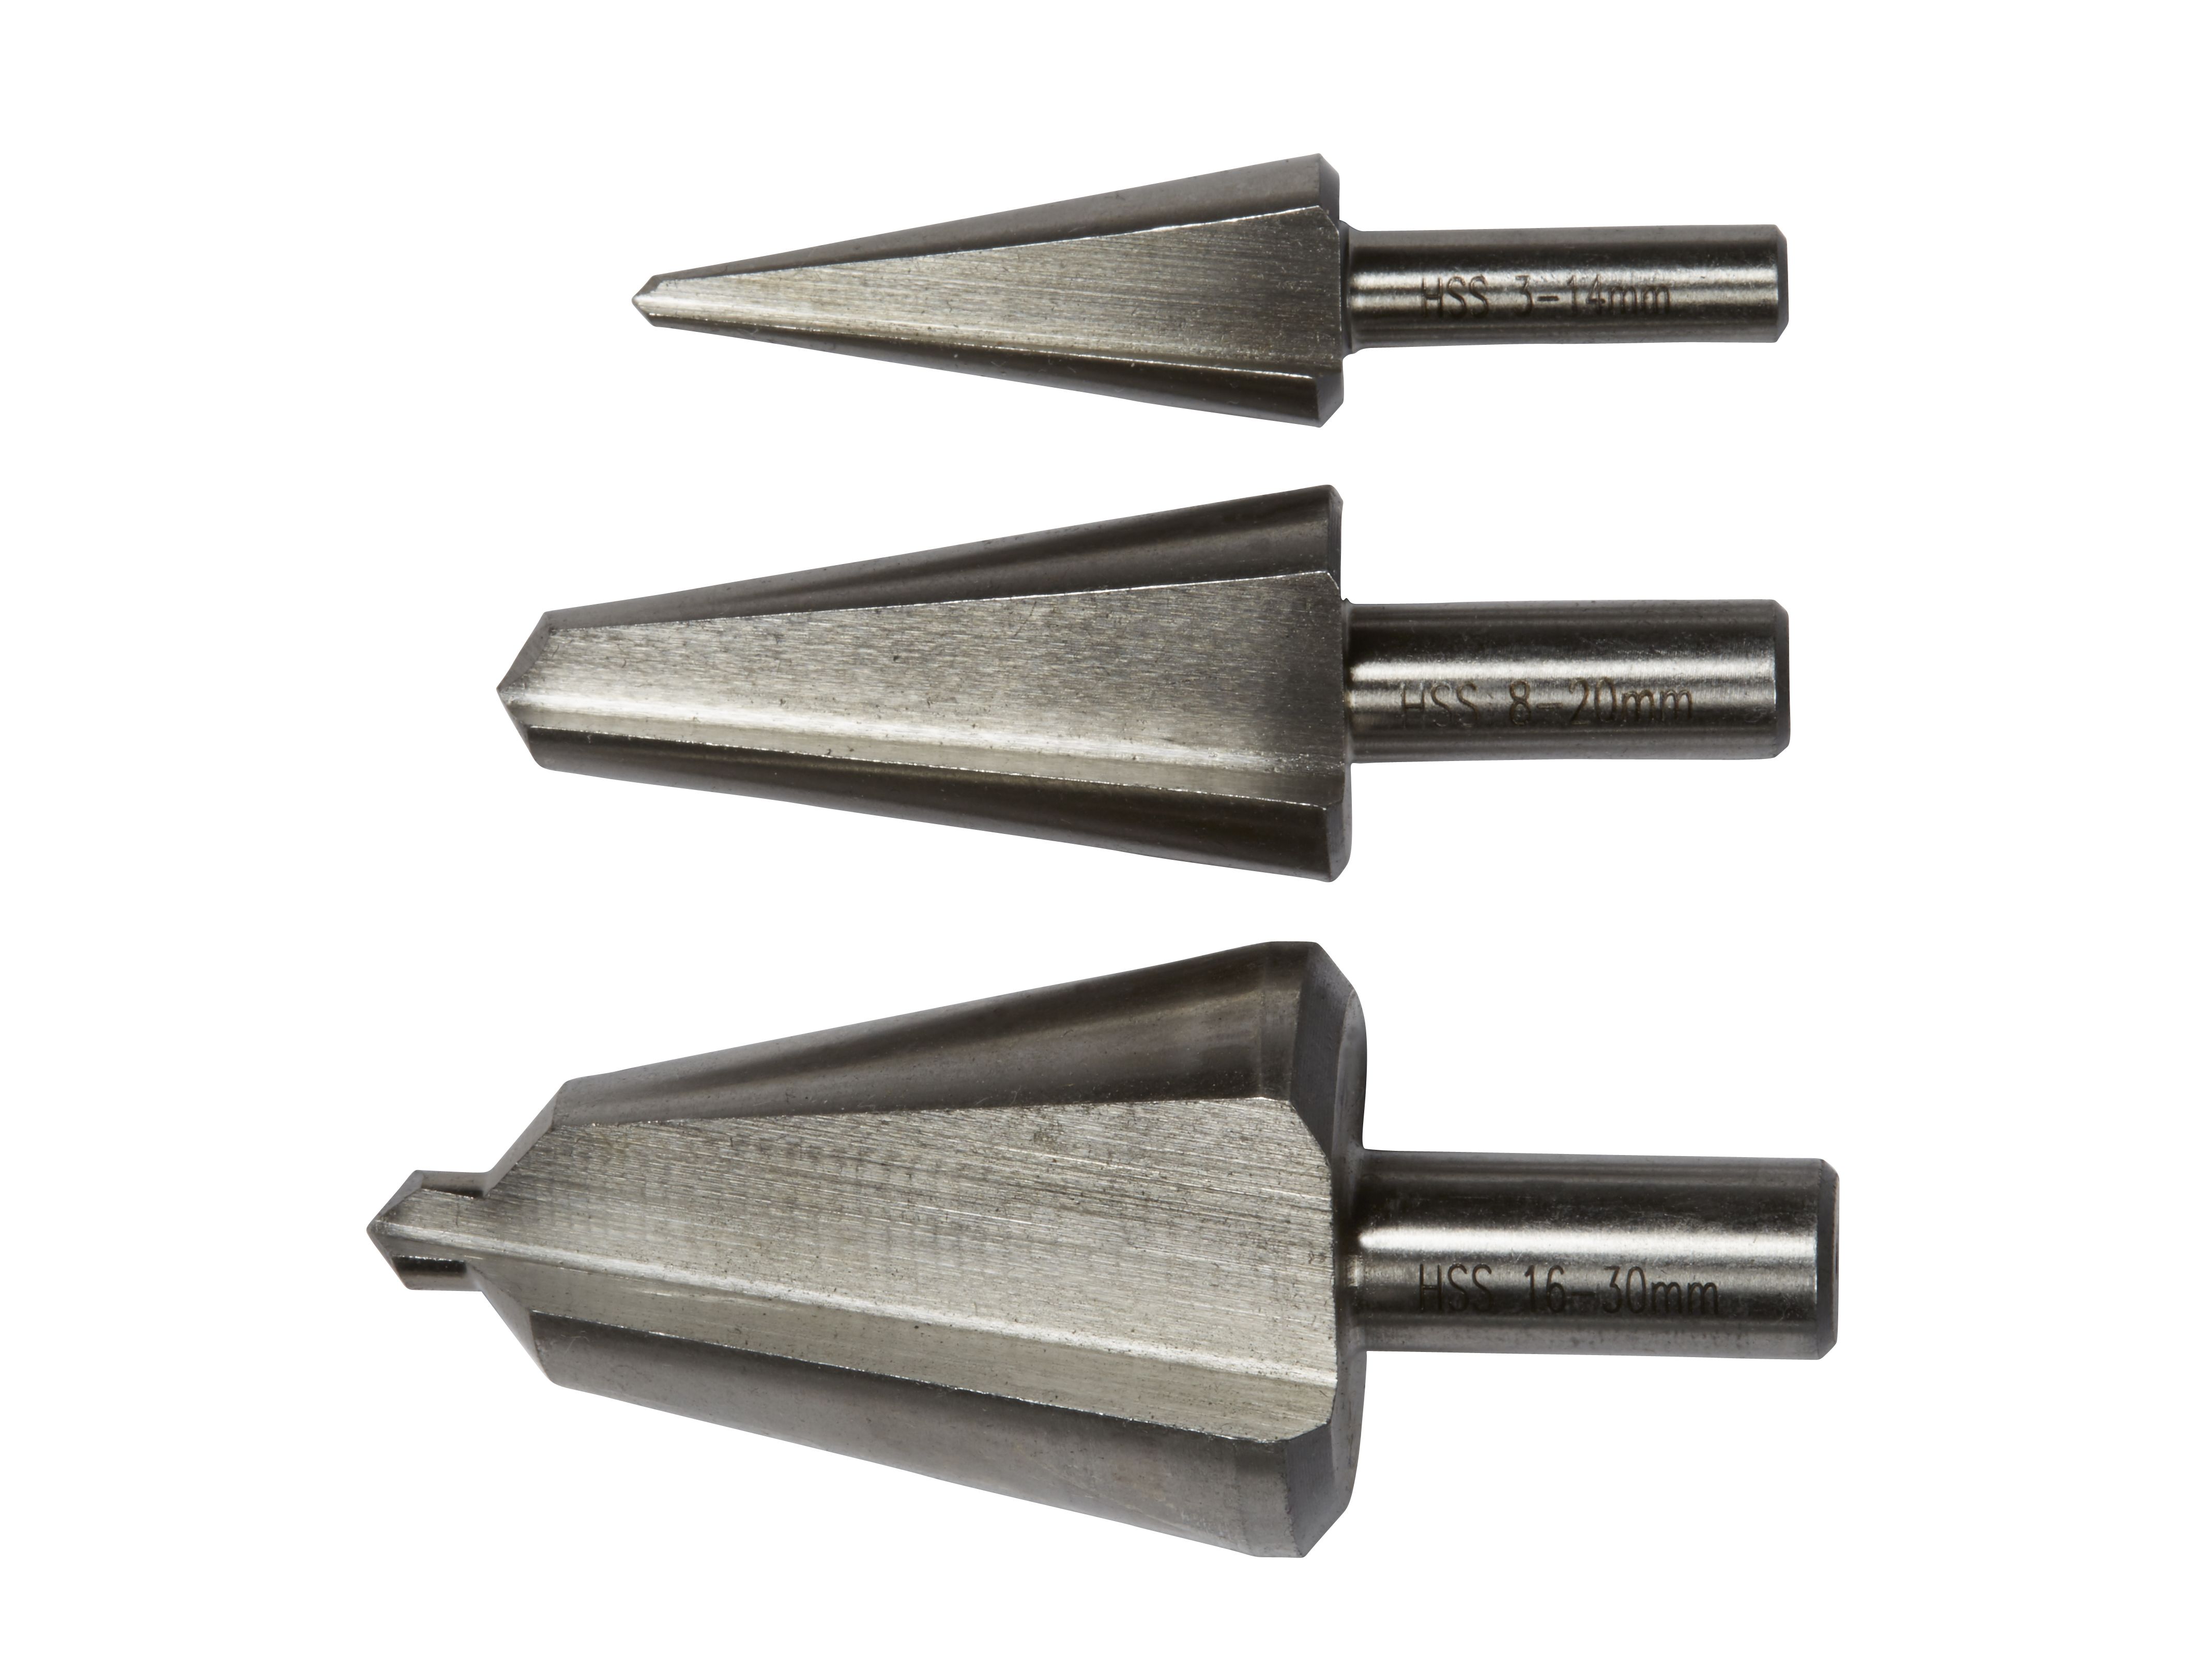 Erbauer Step drill bits, Pack of 3